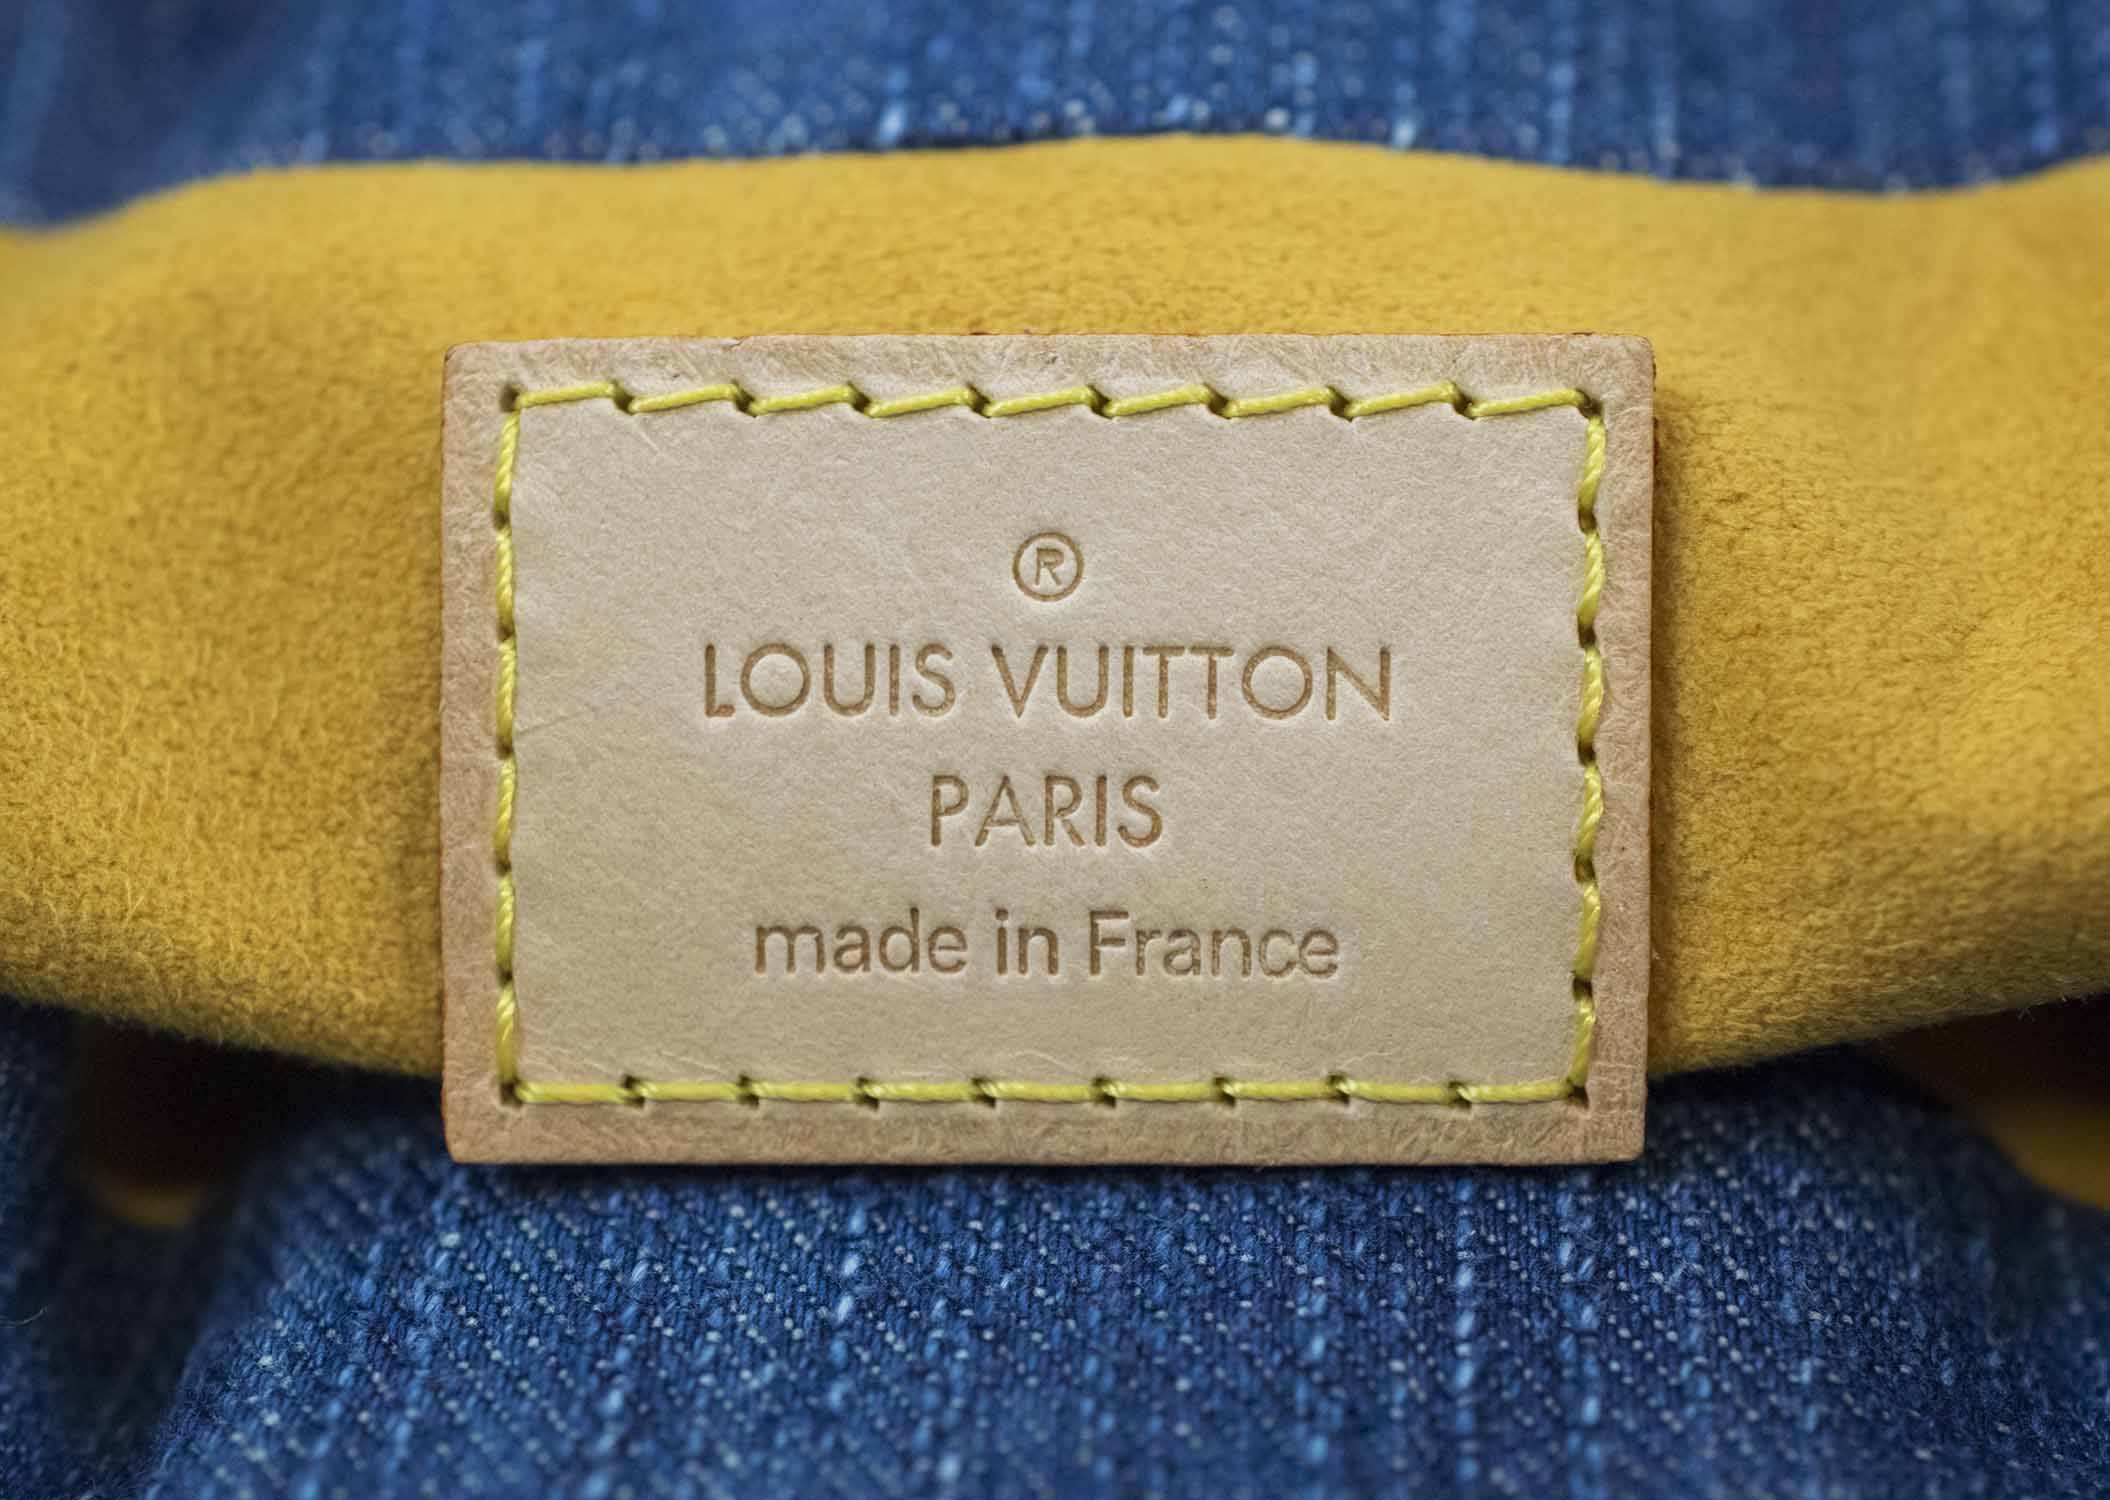 LOUIS VUITTON DENIM HANDBAG, monogram denim with leather trims and handles,  gold tone hardware, push clasp front closure and snap closure at both  sides, 25cm x 15cm H with dust bag and